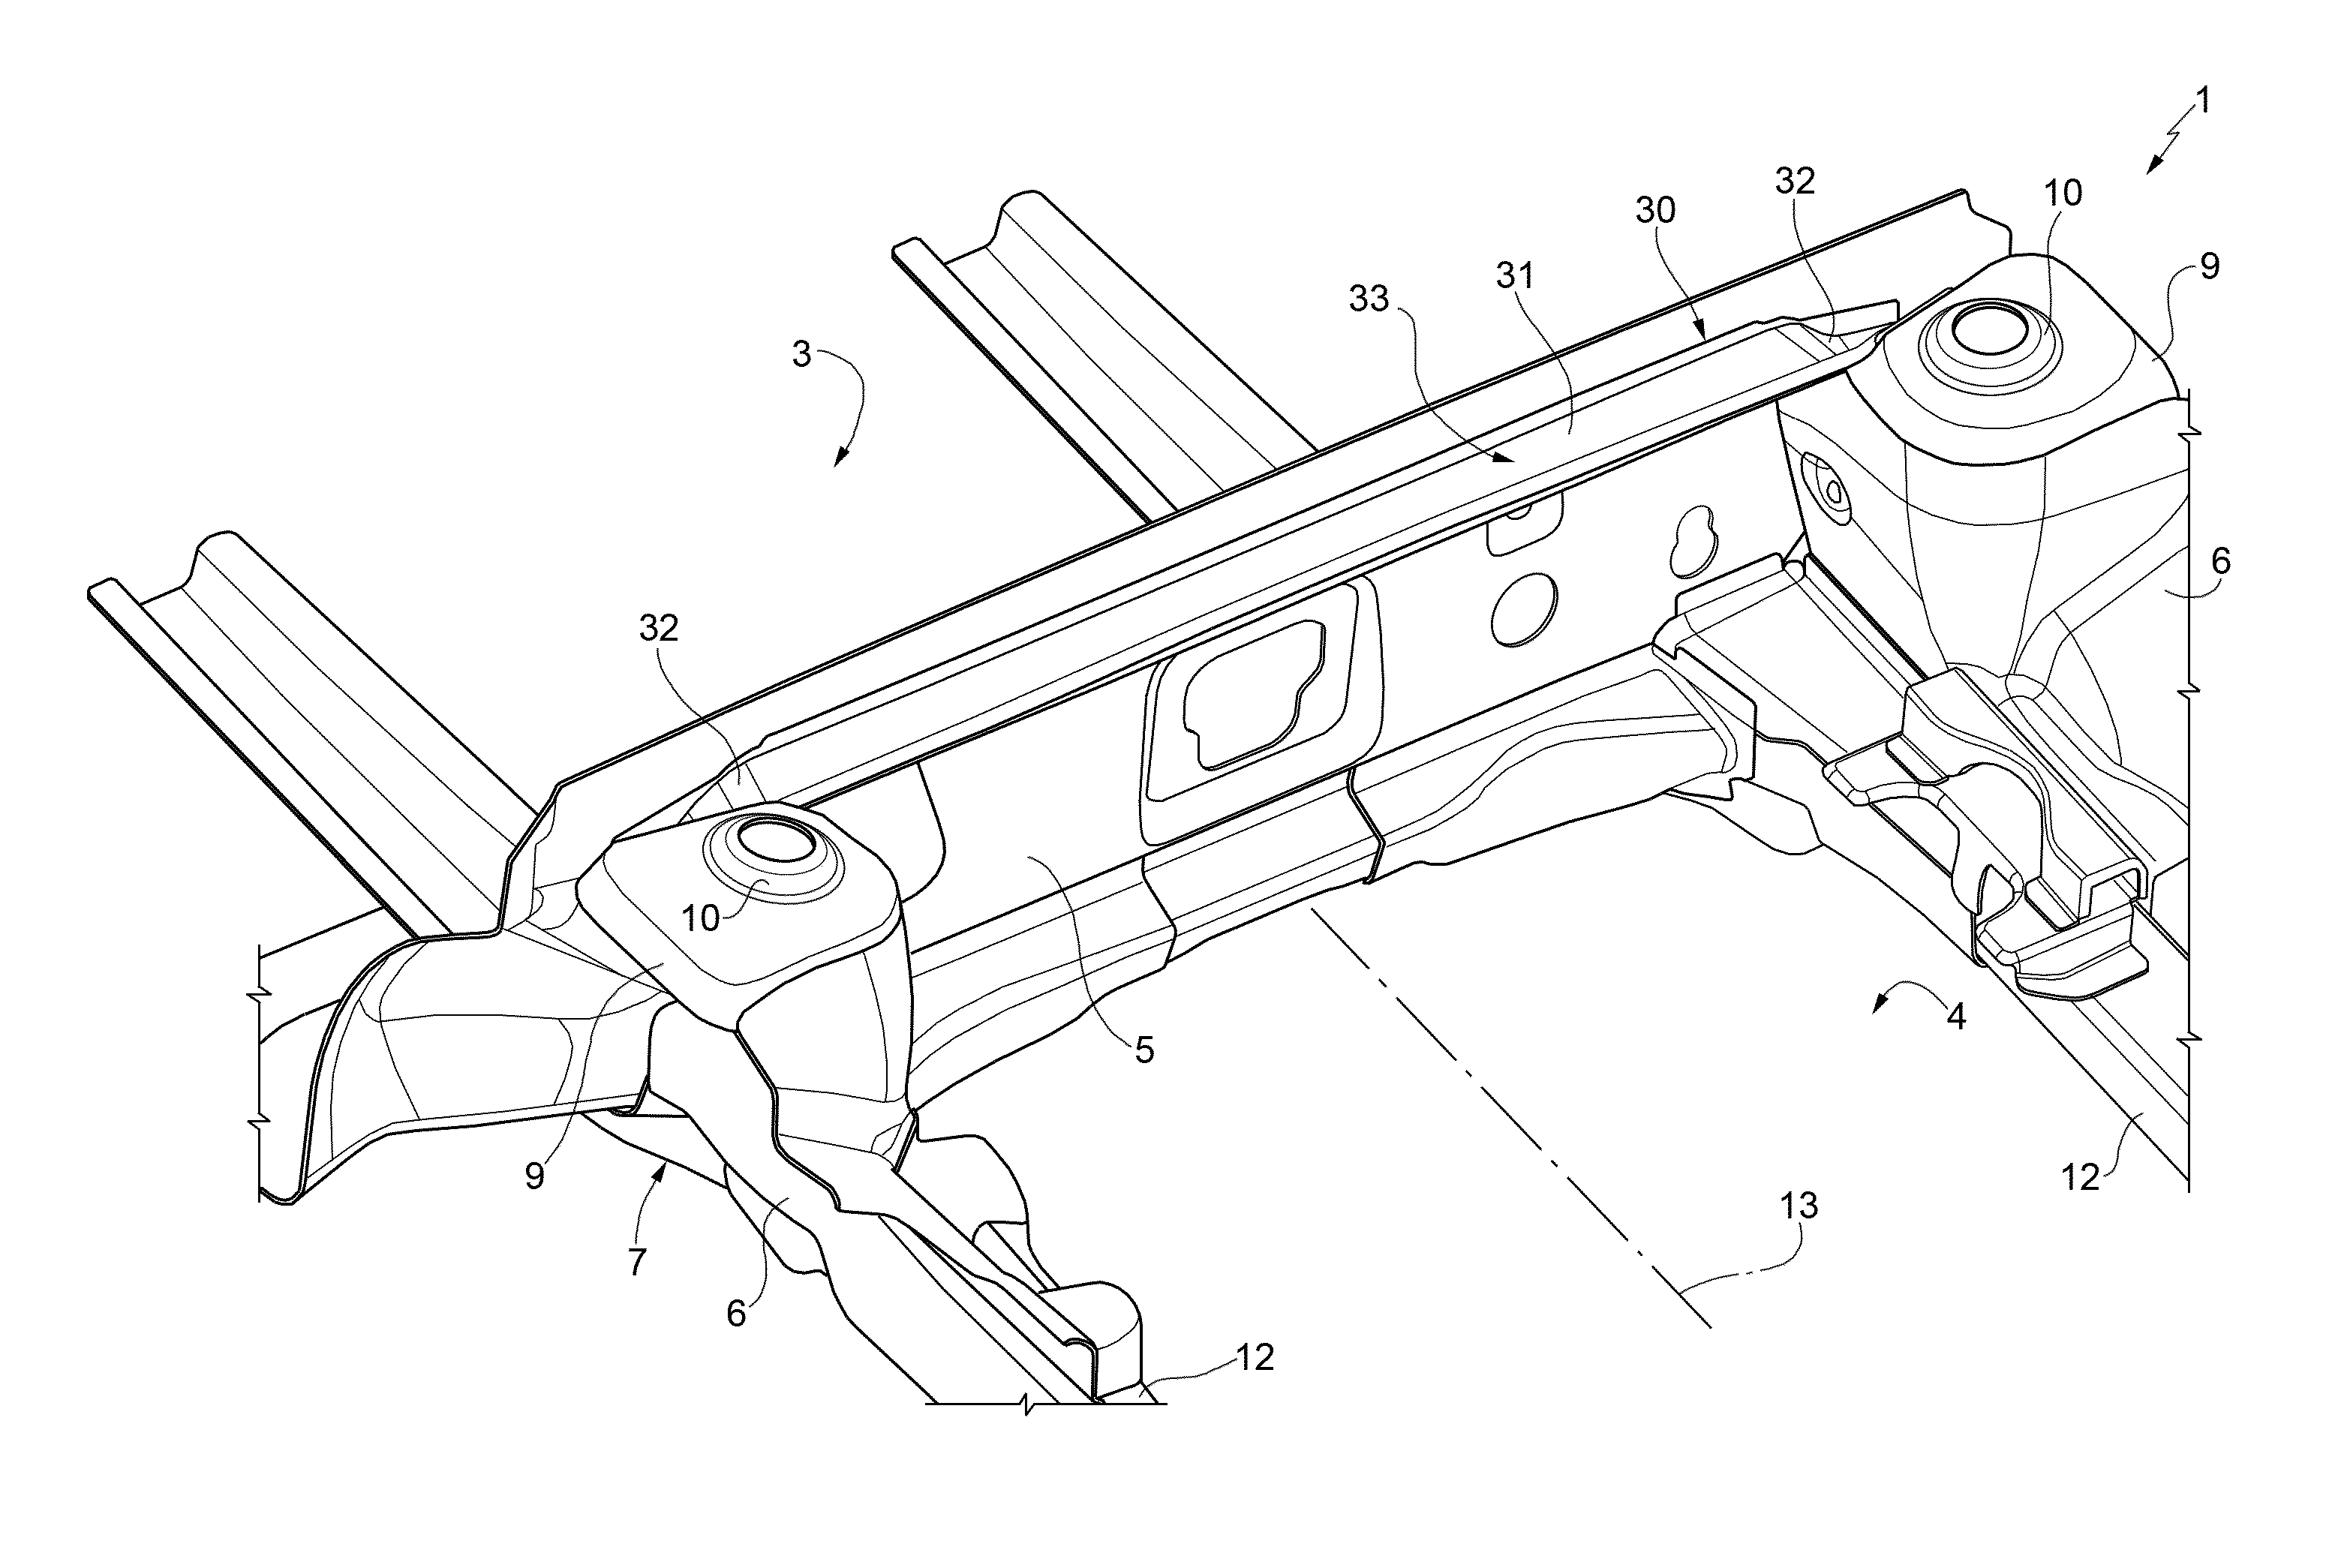 Motor vehicle body provided with a structure for receiving and draining water